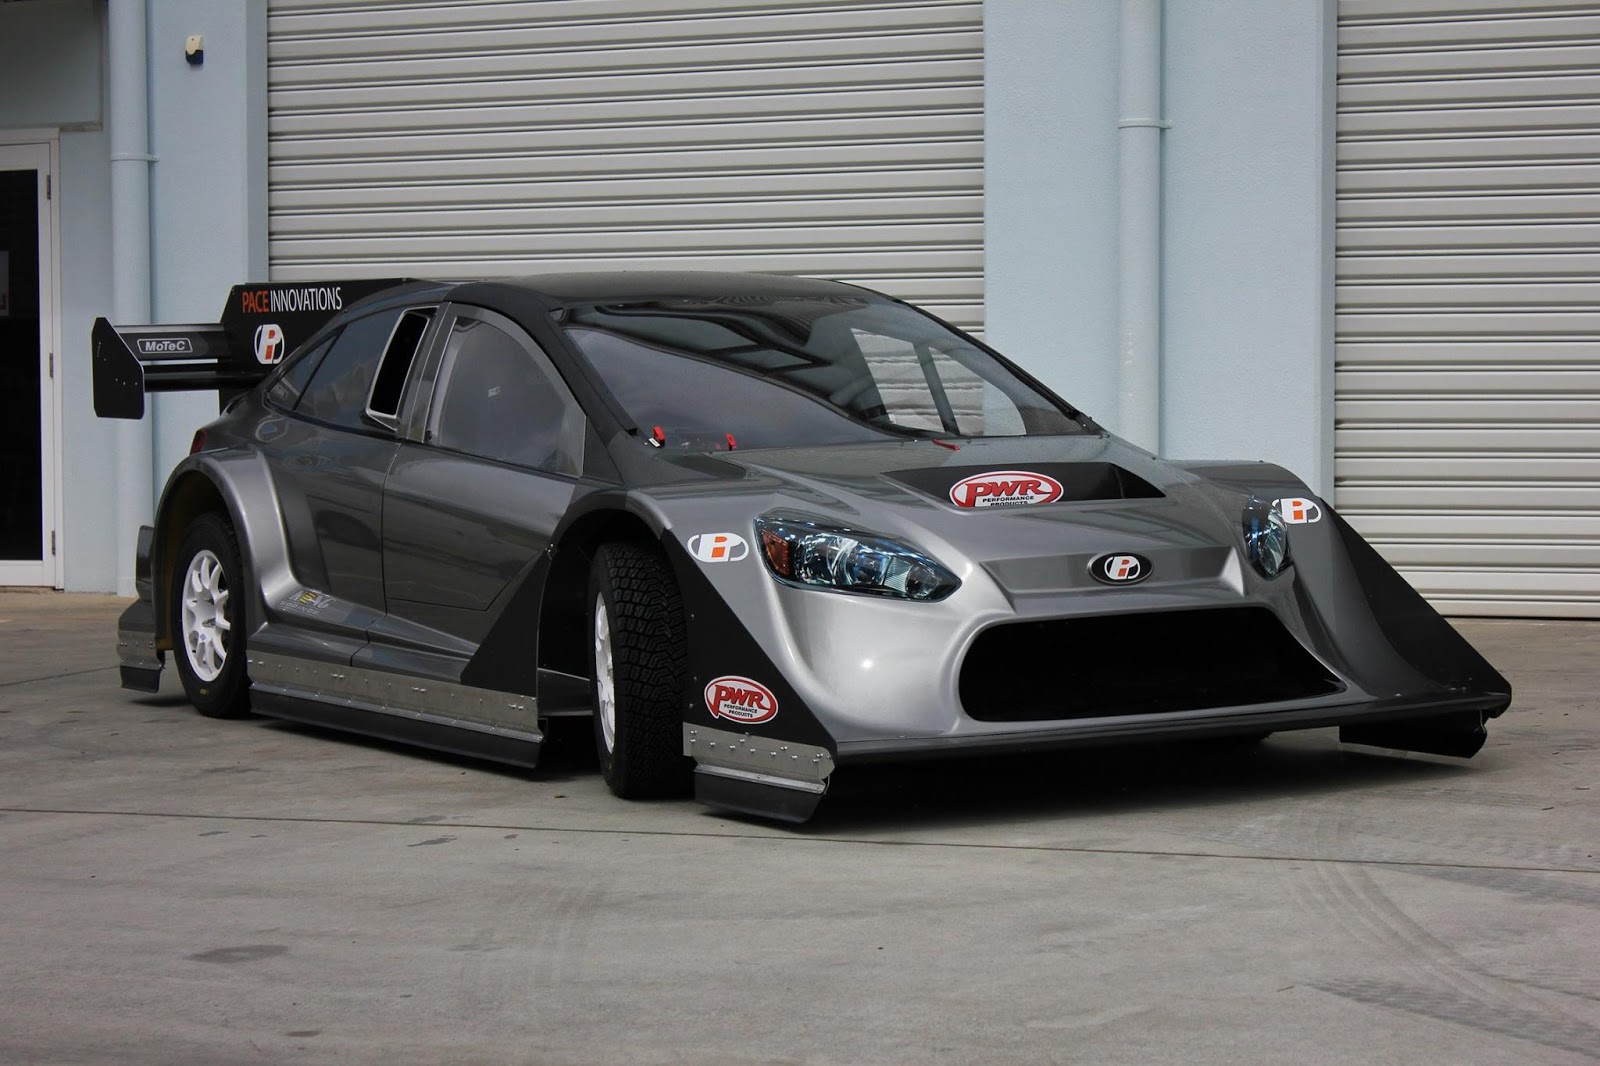 Ford Focus gets Nissan GT-R engine conversion for Pikes Peak (video)